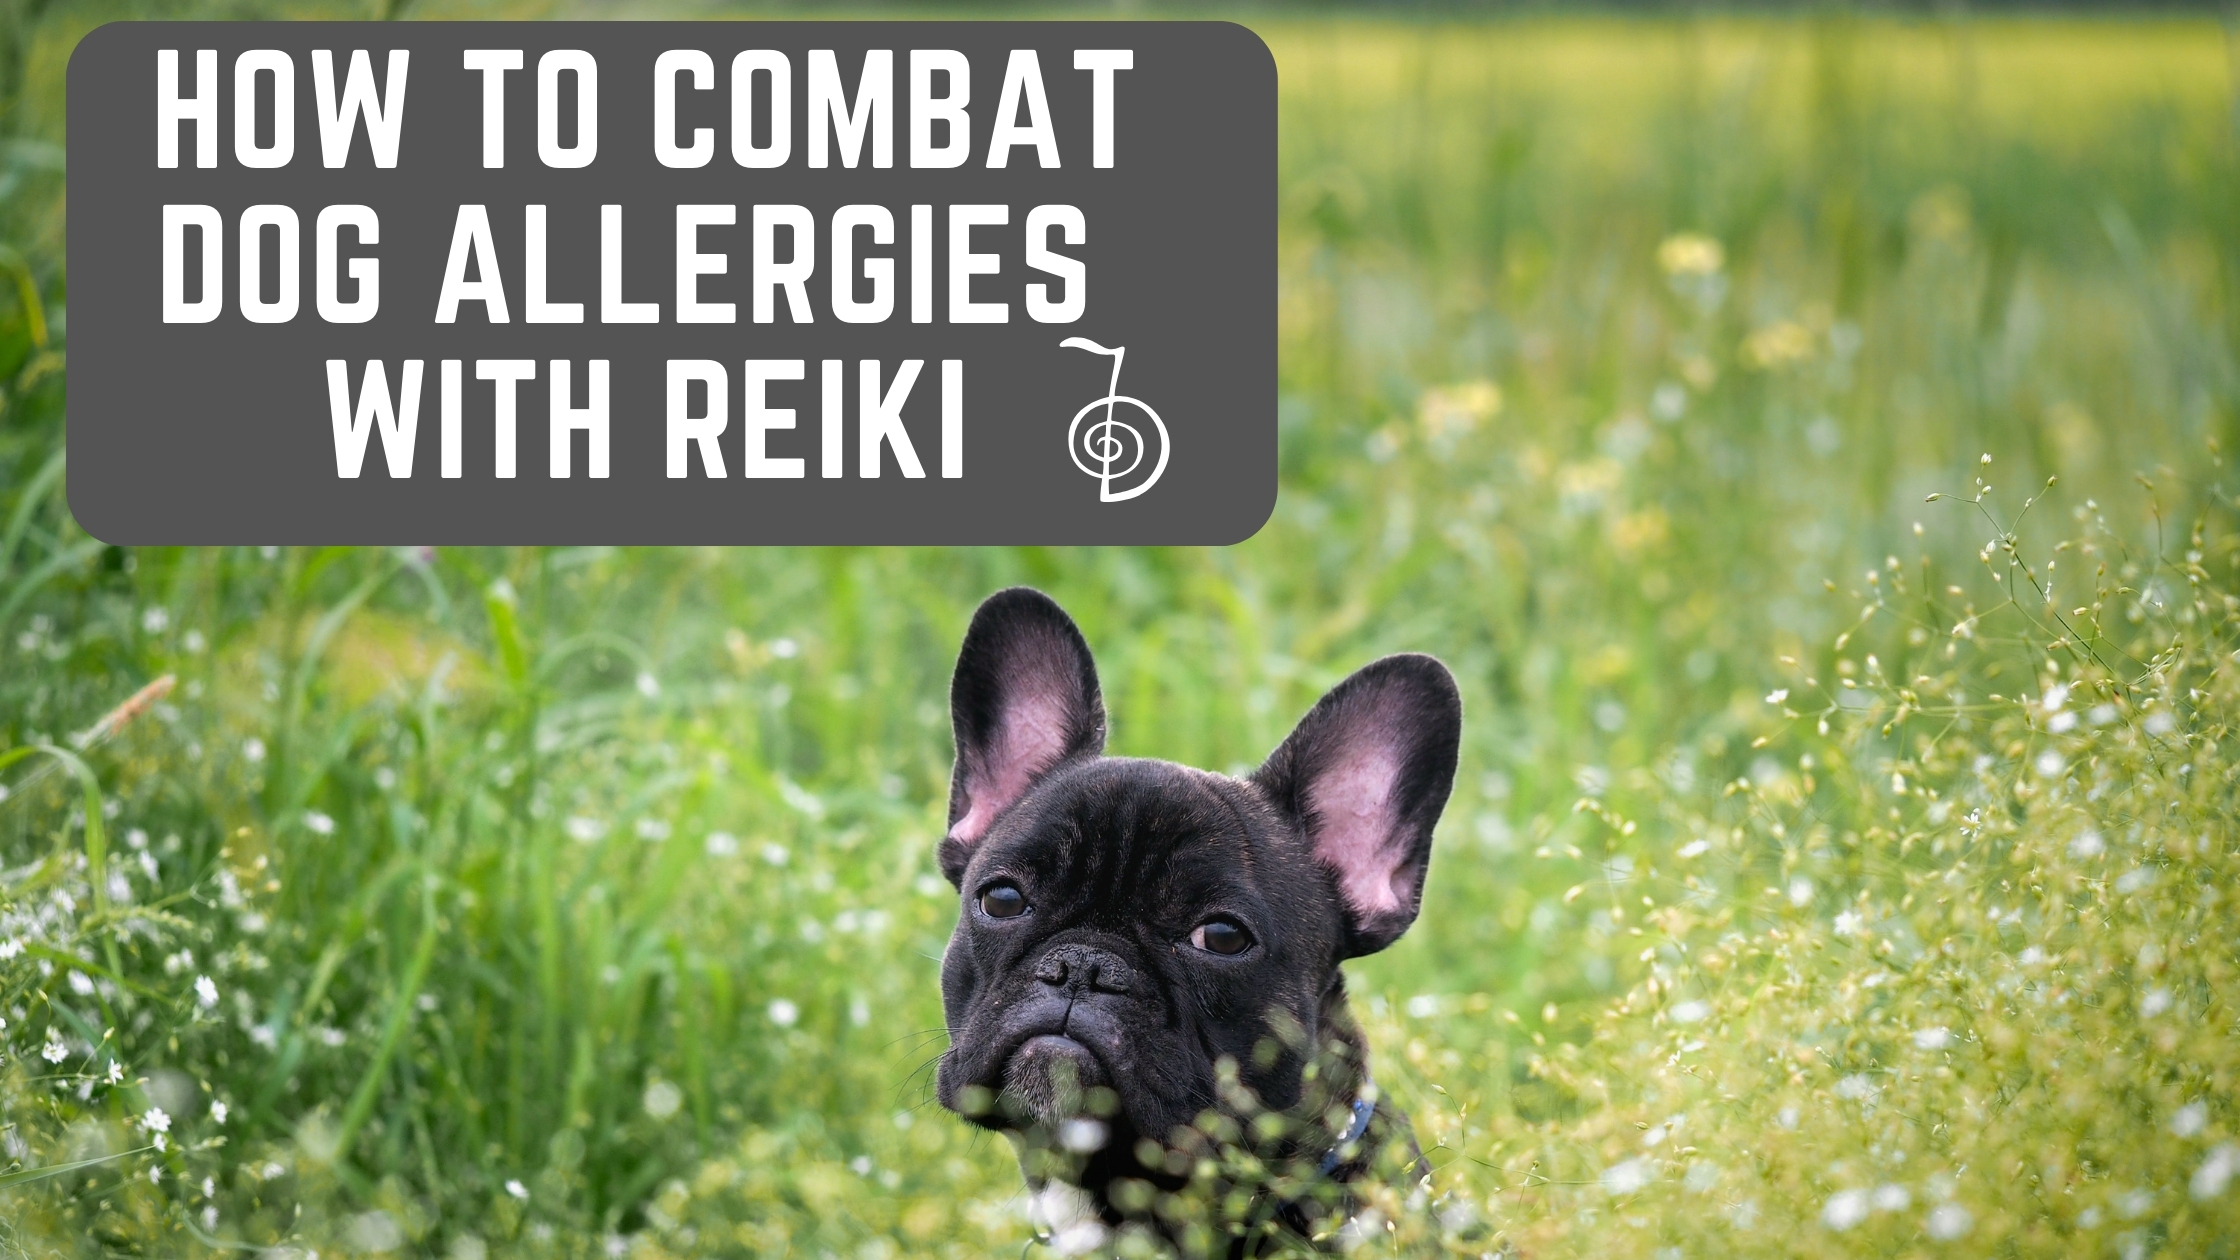 Work with Animals, how to combat dog allergies with Reiki